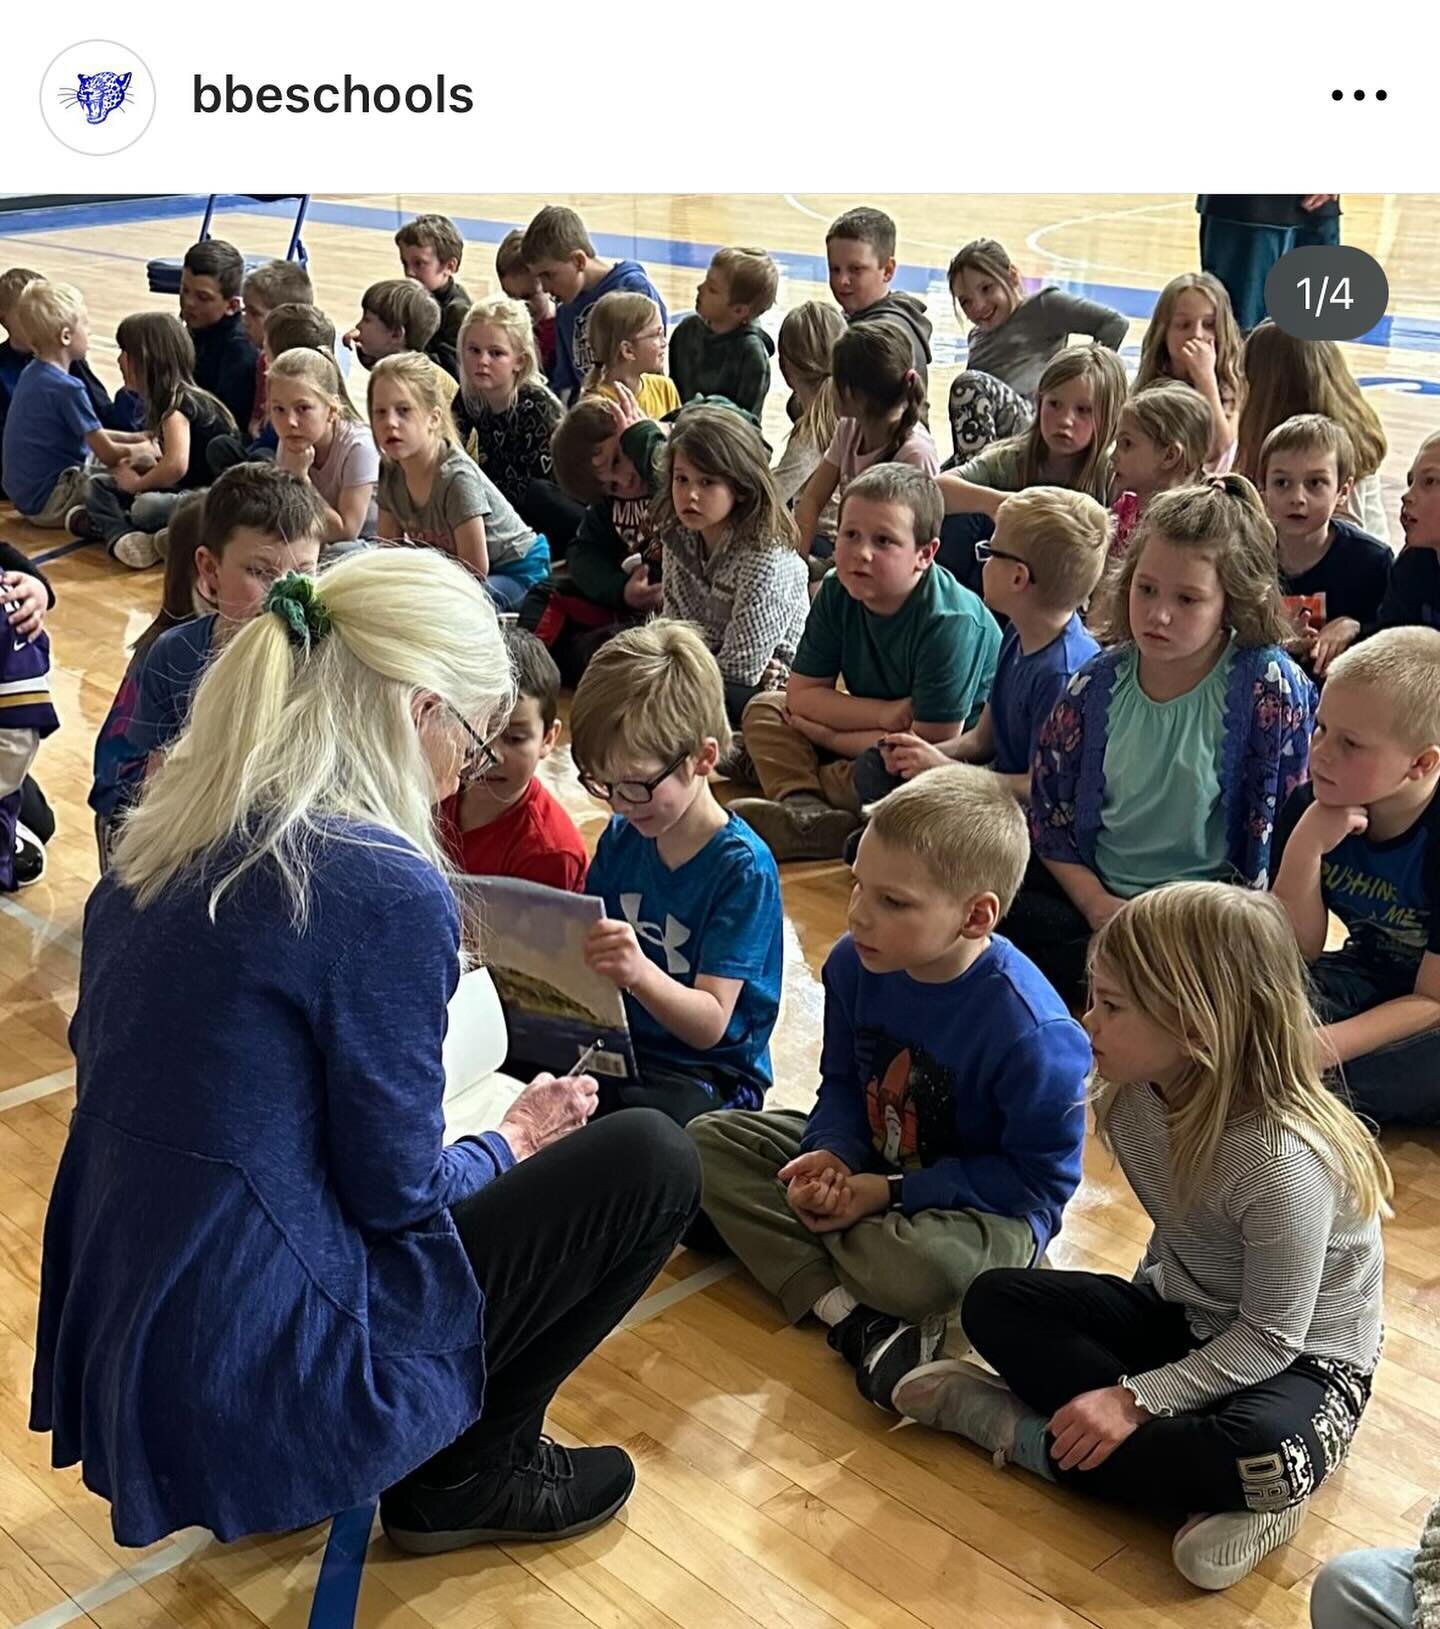 Thanks to @greatriverlibrary for setting up this tour to awesome schools full of bright kids, game for all our shenanigans!  Thanks @bbeschools for pics&mdash;and fun! Plus library visits to Royalton April 11 and Elk River April 13 #authorvisit #kidl